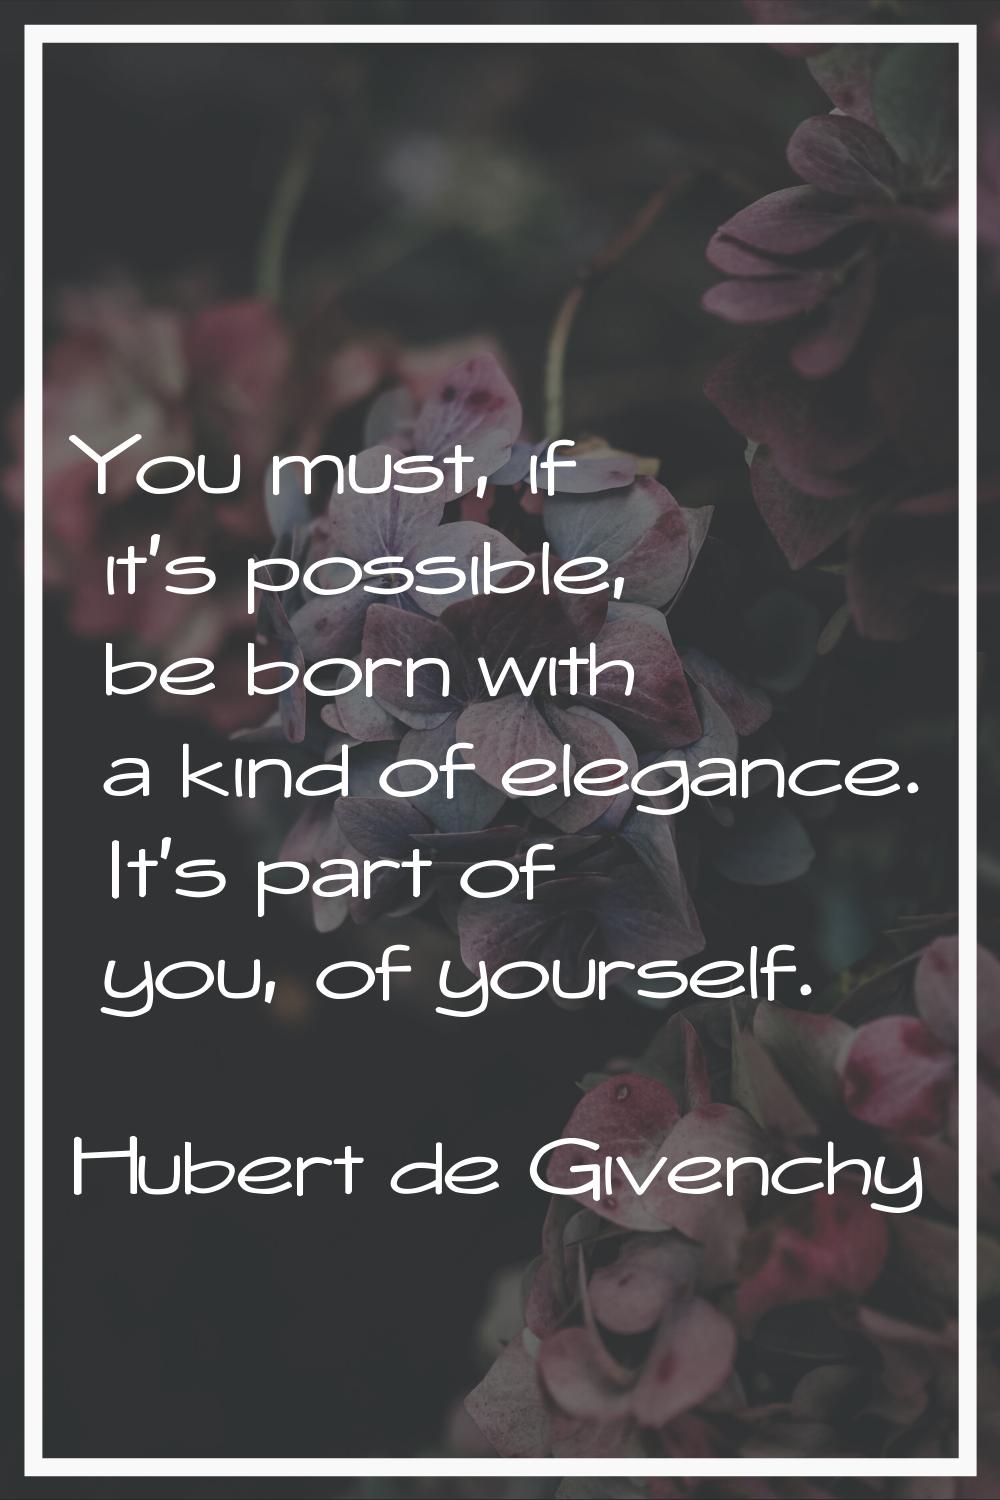 You must, if it's possible, be born with a kind of elegance. It's part of you, of yourself.